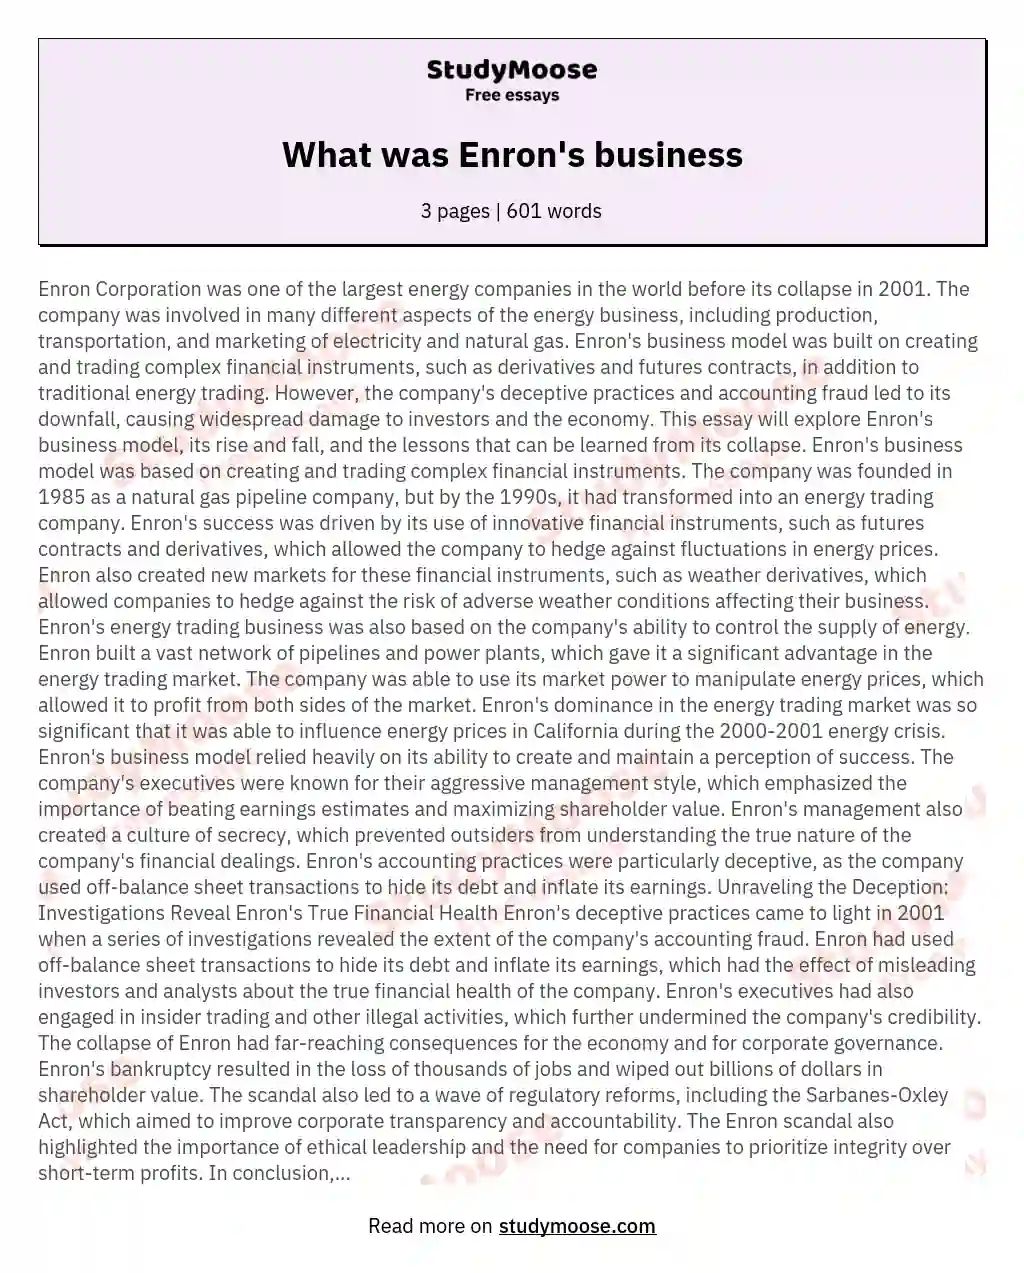 What was Enron's business essay